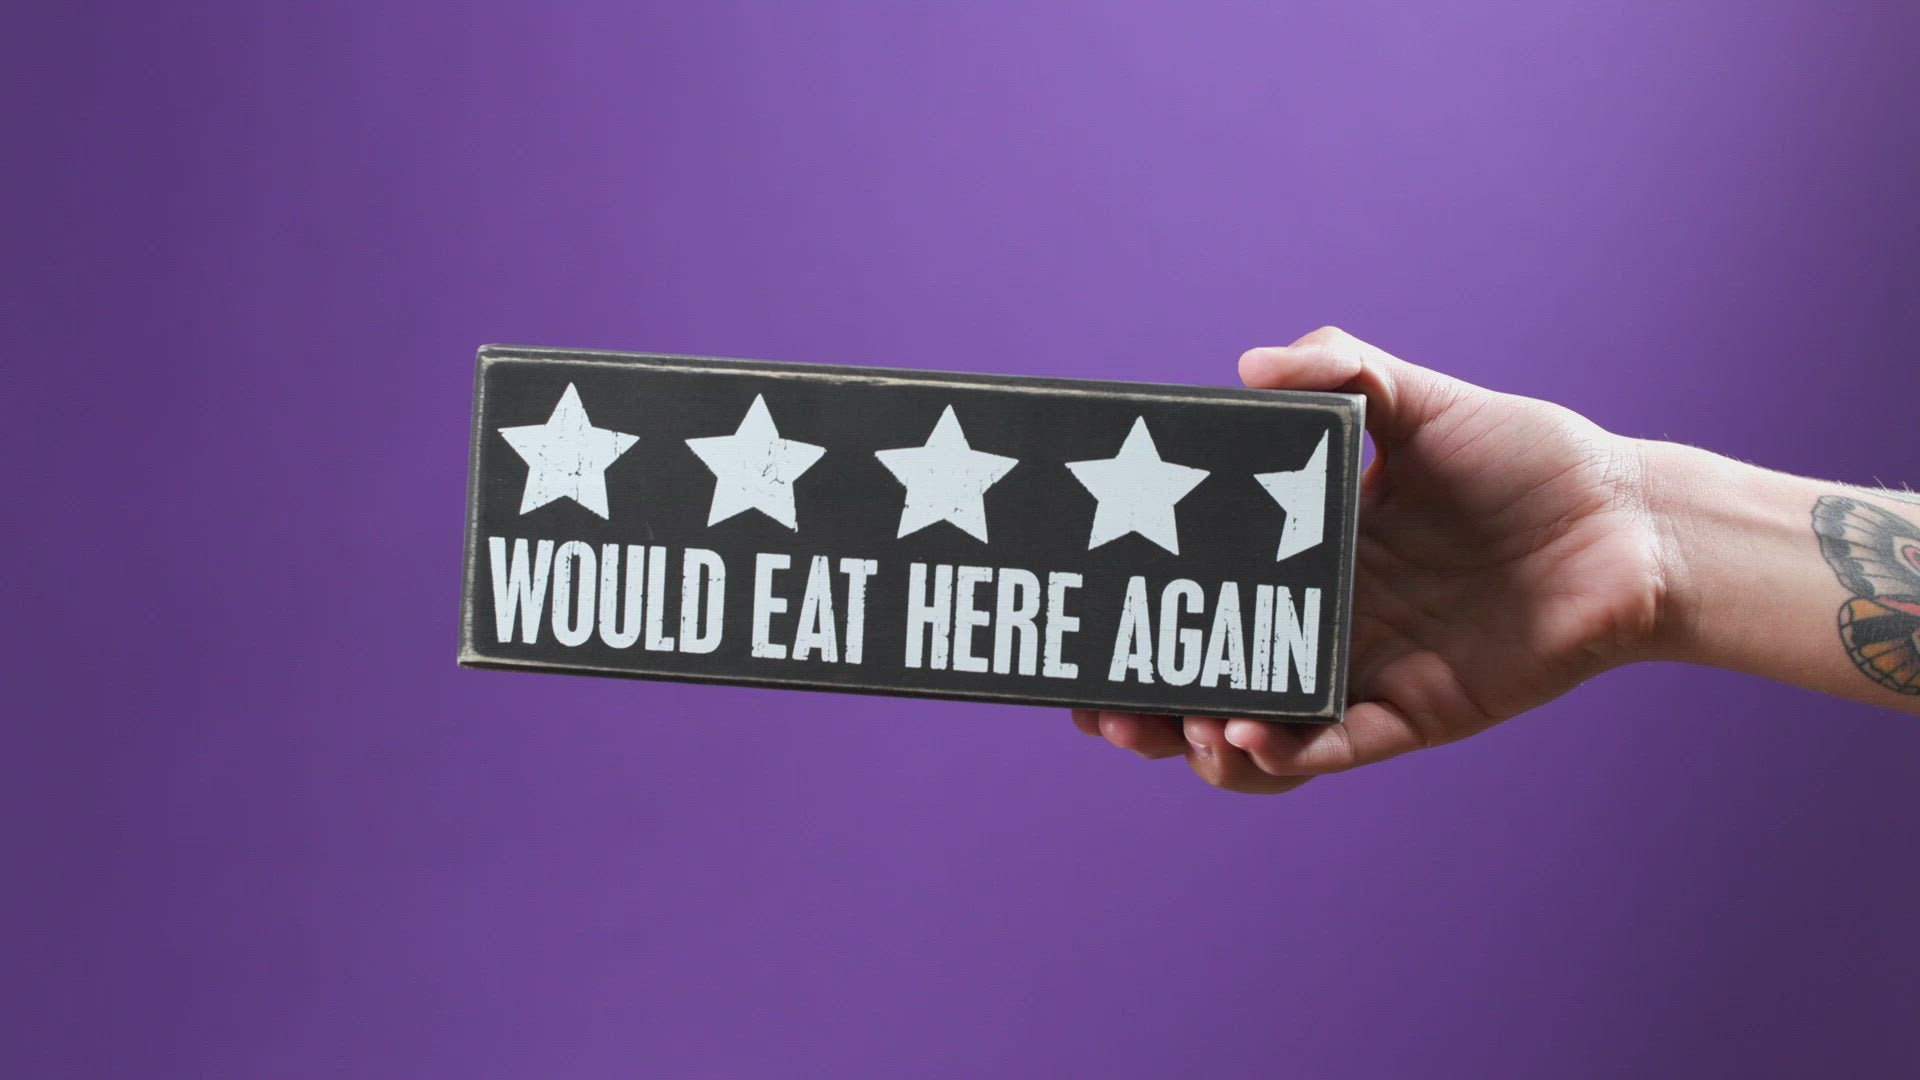 Video of Would Eat Here Again 4.5 Stars Wooden Box Sign tossed in the air